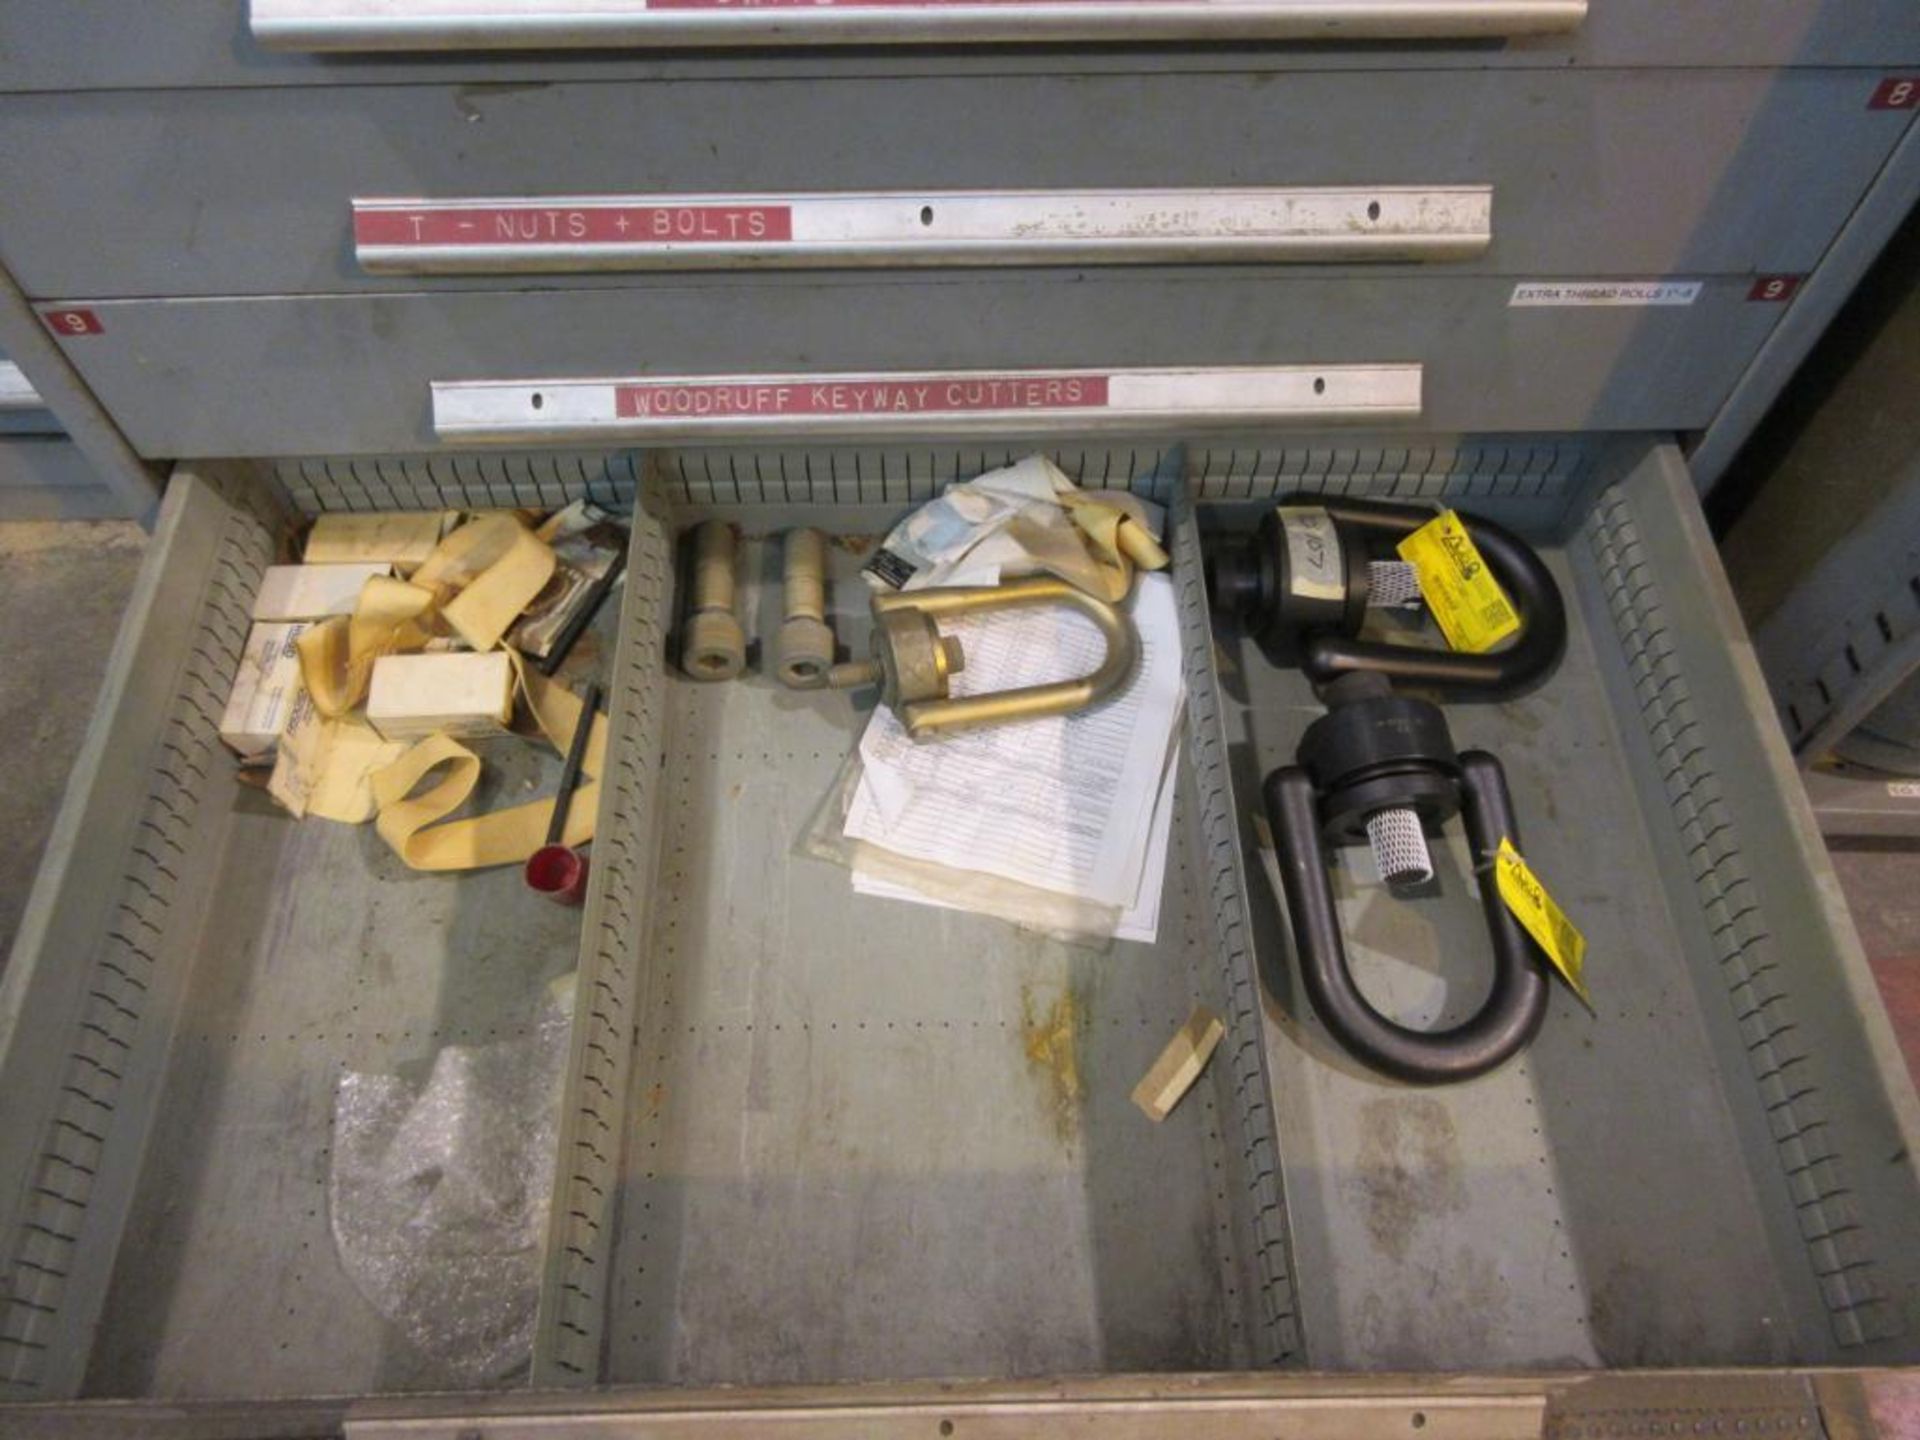 VIDMAR 10-DRAWER CABINET W/ ALL-THREAD, T-NUTS, FLANGED NUTS, CUTTERS - Image 7 of 7